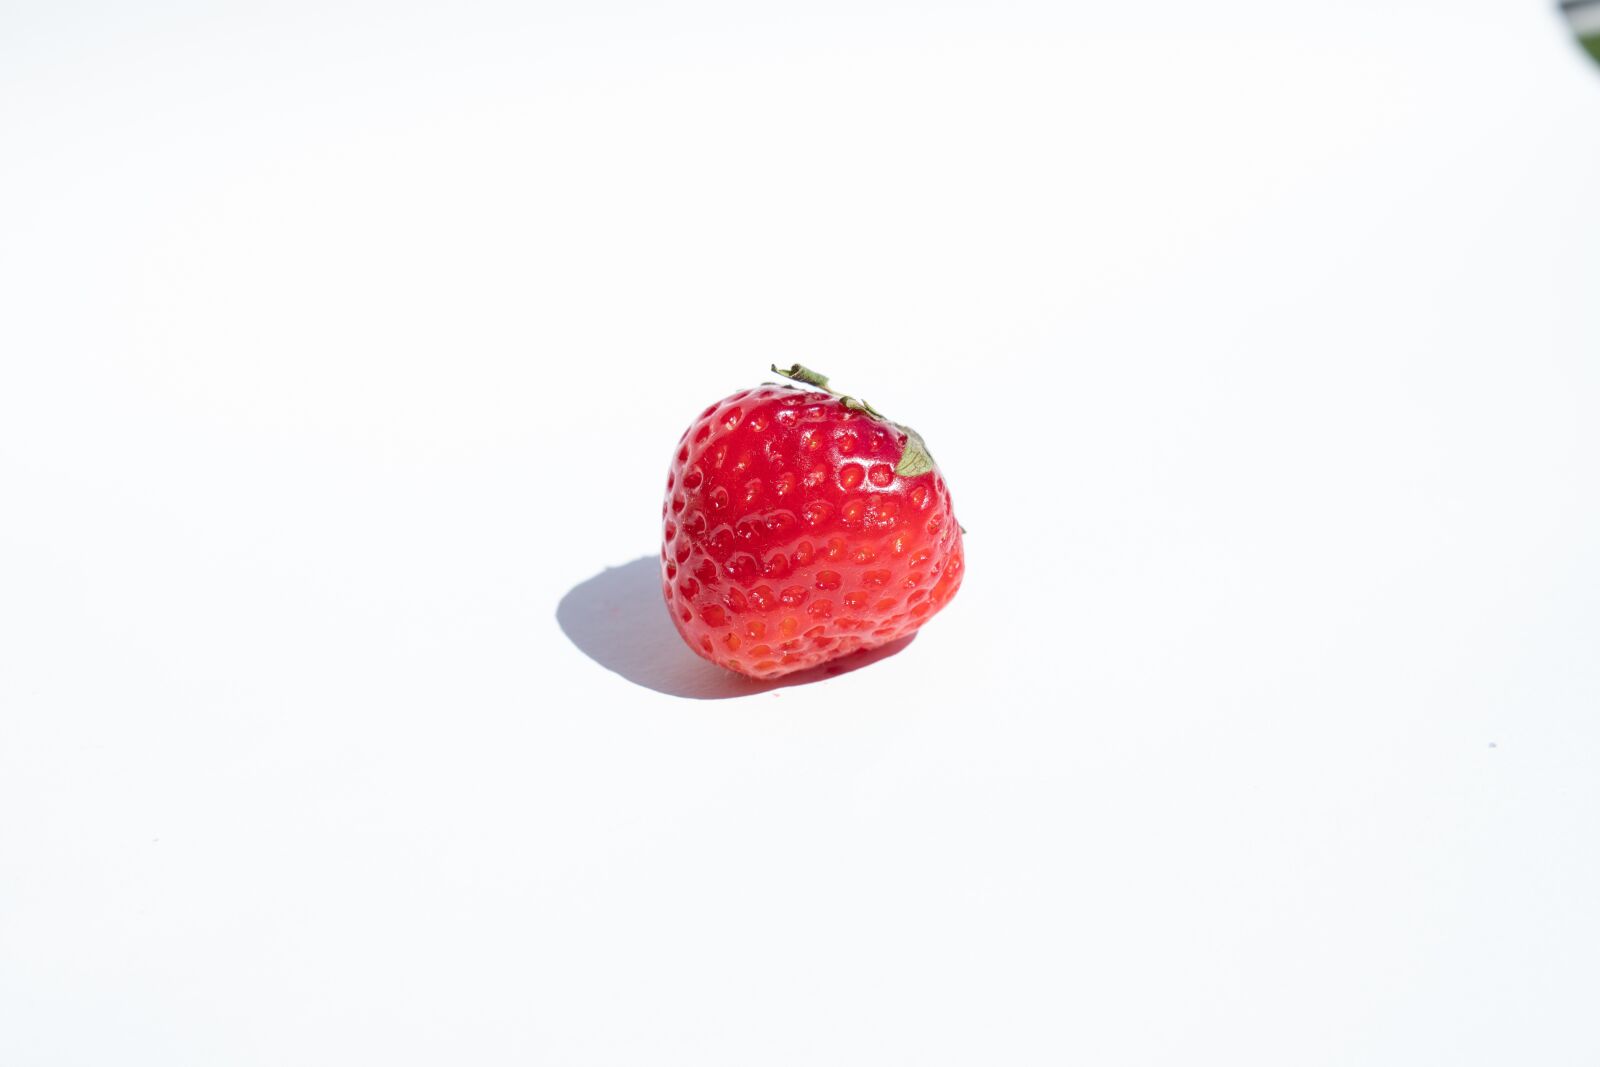 Sony a6500 + Sony FE 28-70mm F3.5-5.6 OSS sample photo. Strawberry, red, fruit photography